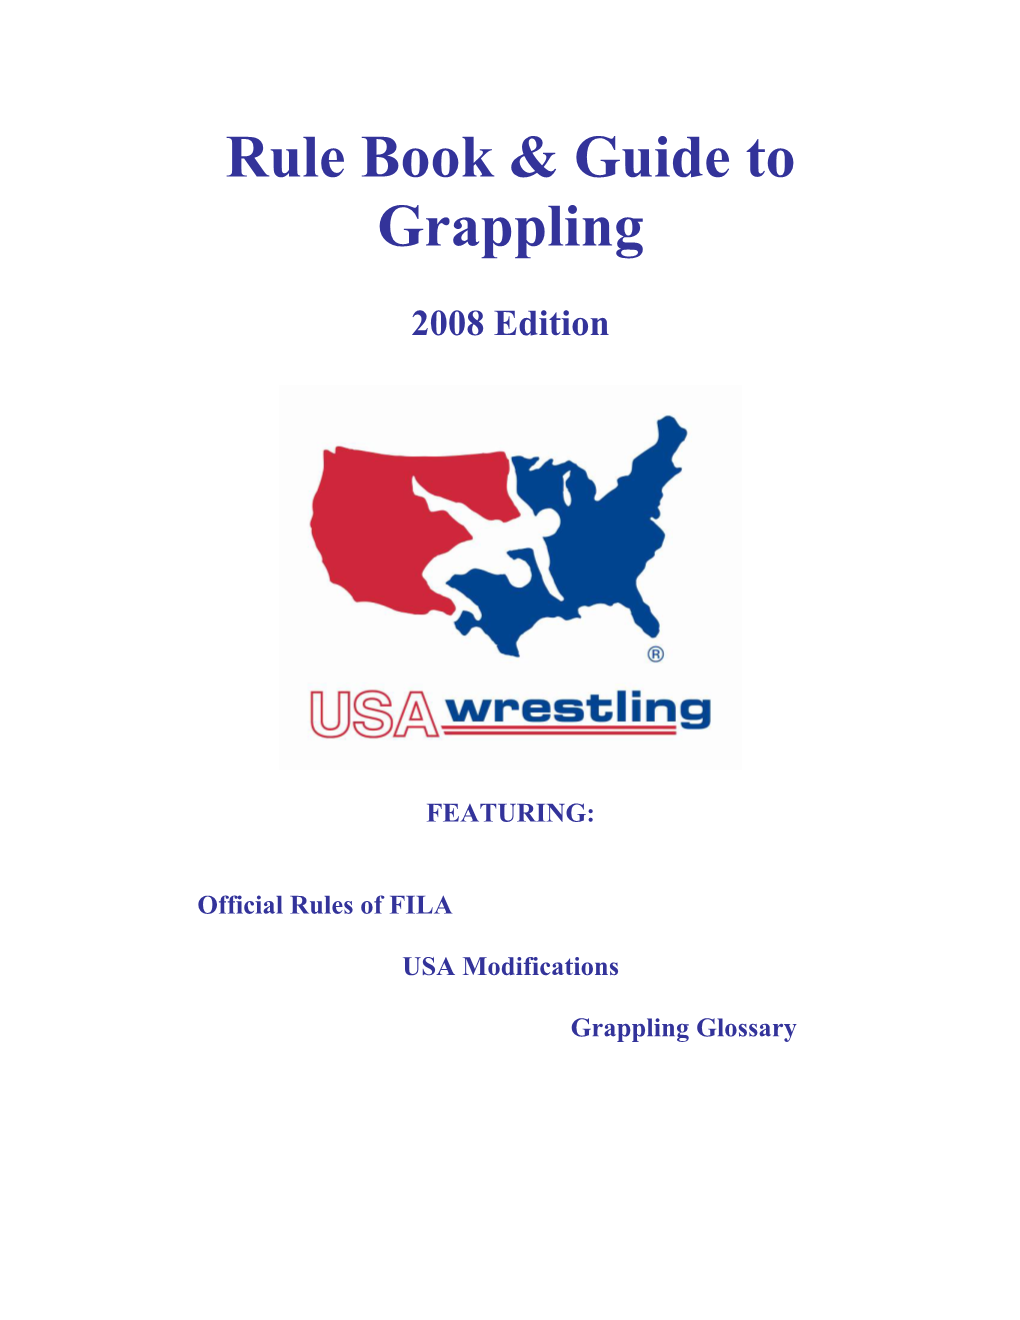 Rule Book & Guide to Grappling